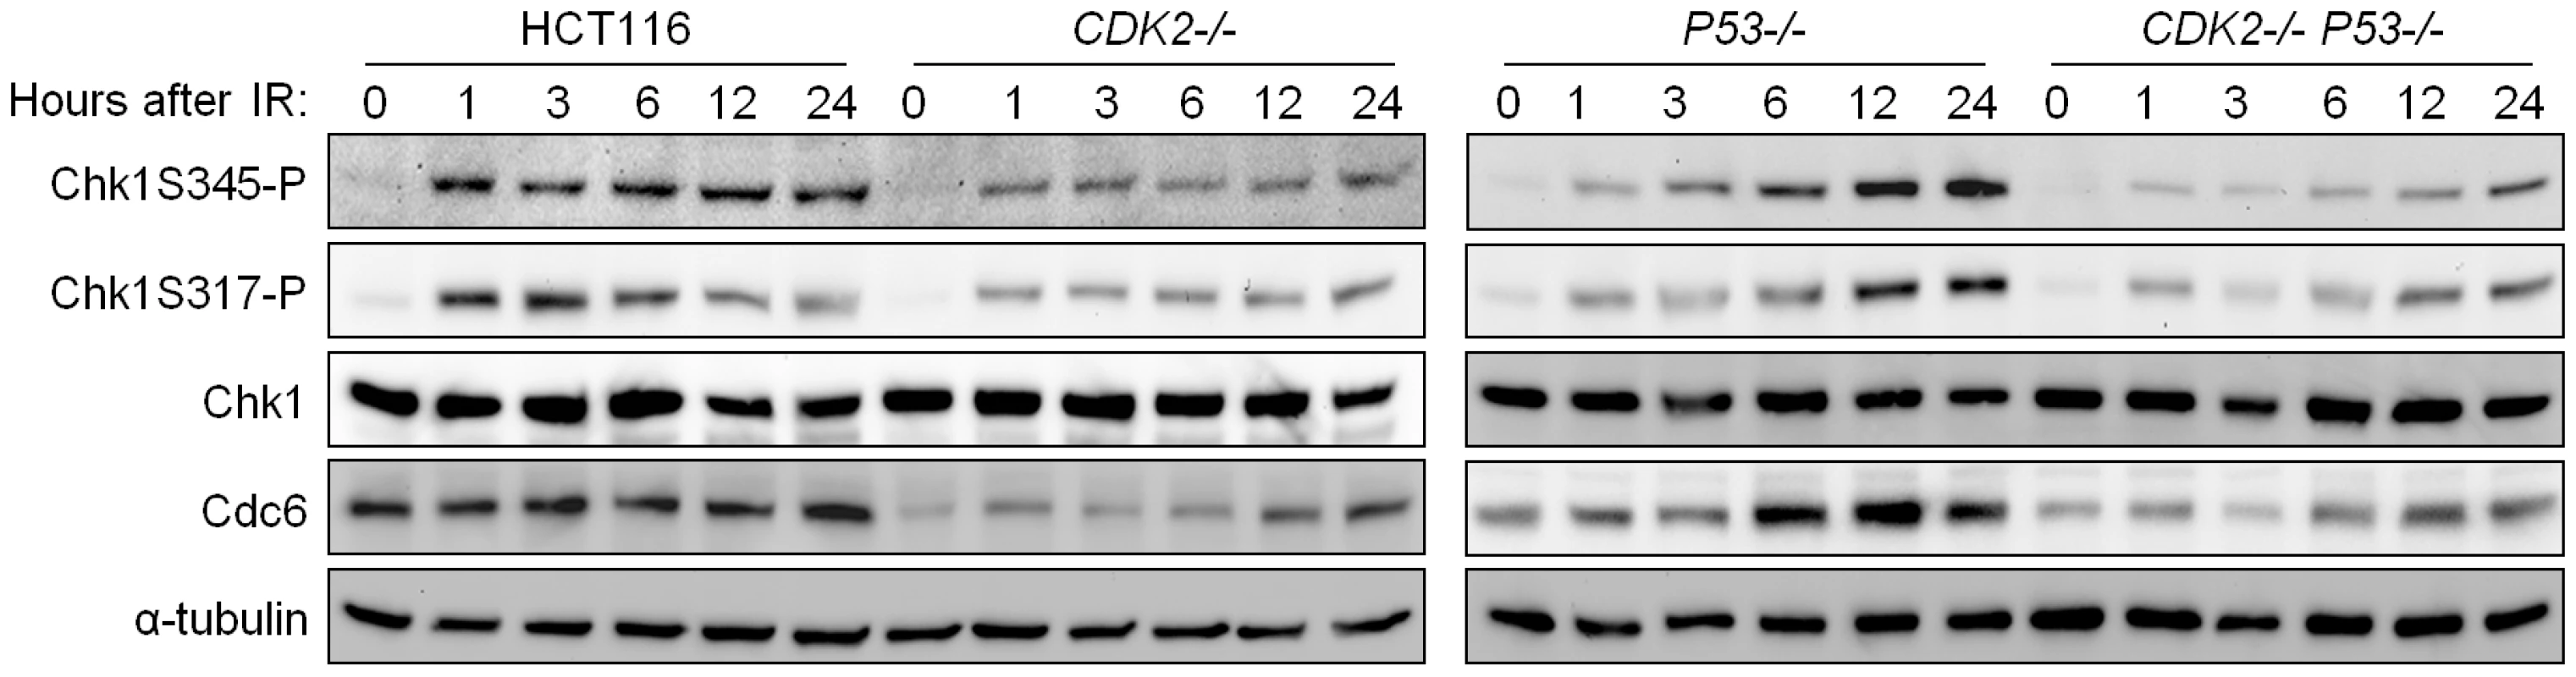 Impaired phosphorylation of Chk1 in Cdk2-deficient cells.